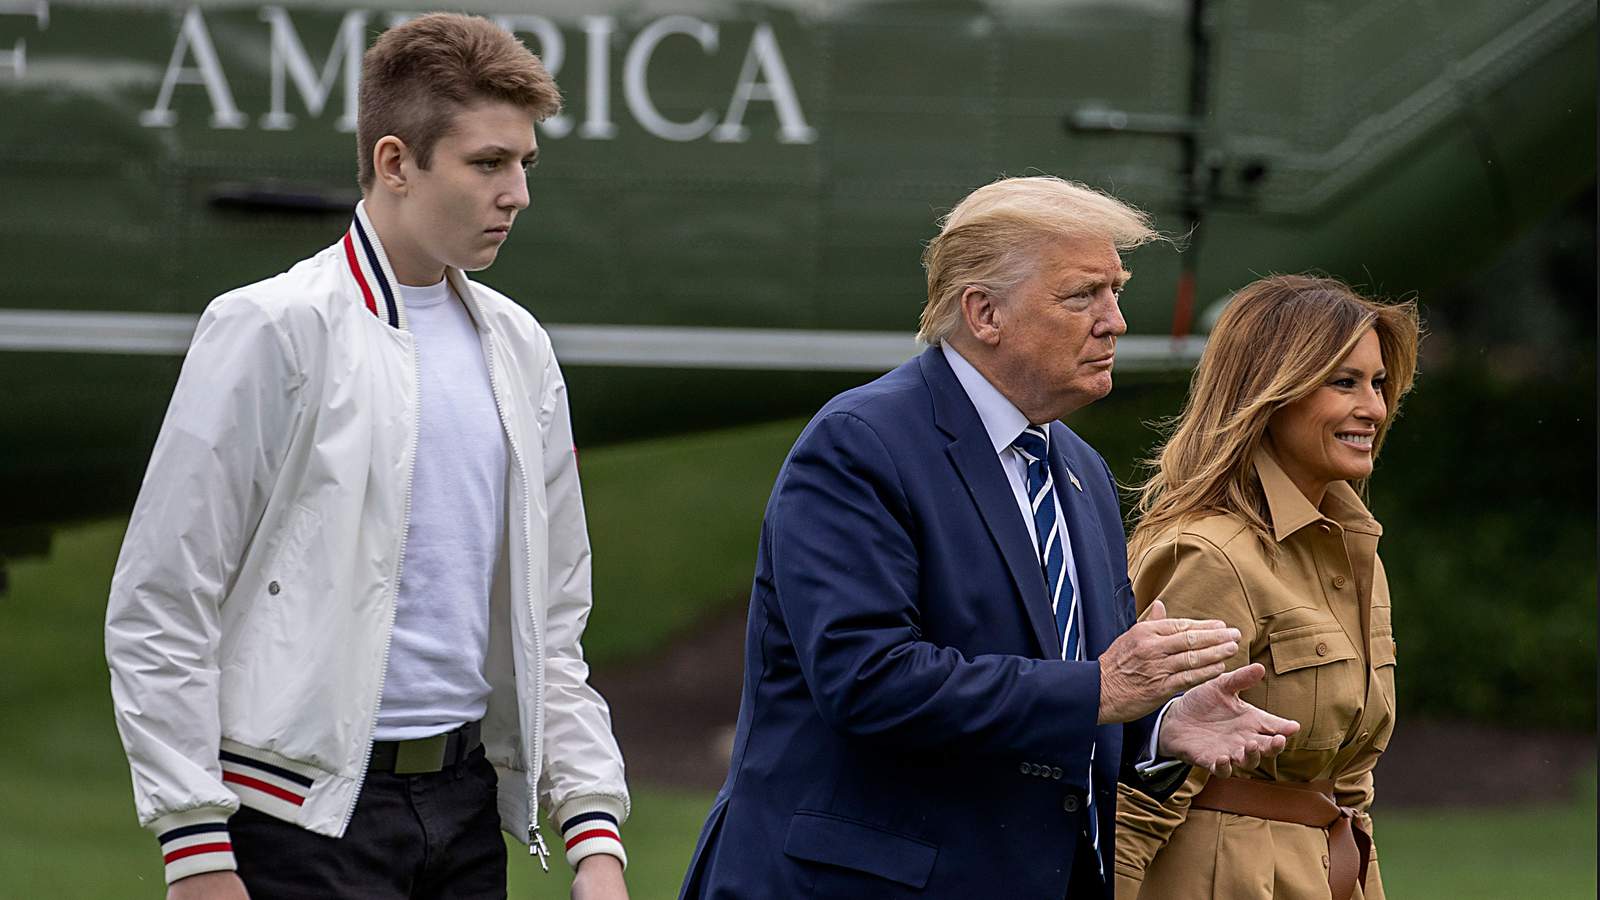 First lady: Barron Trump tested positive for COVID-19